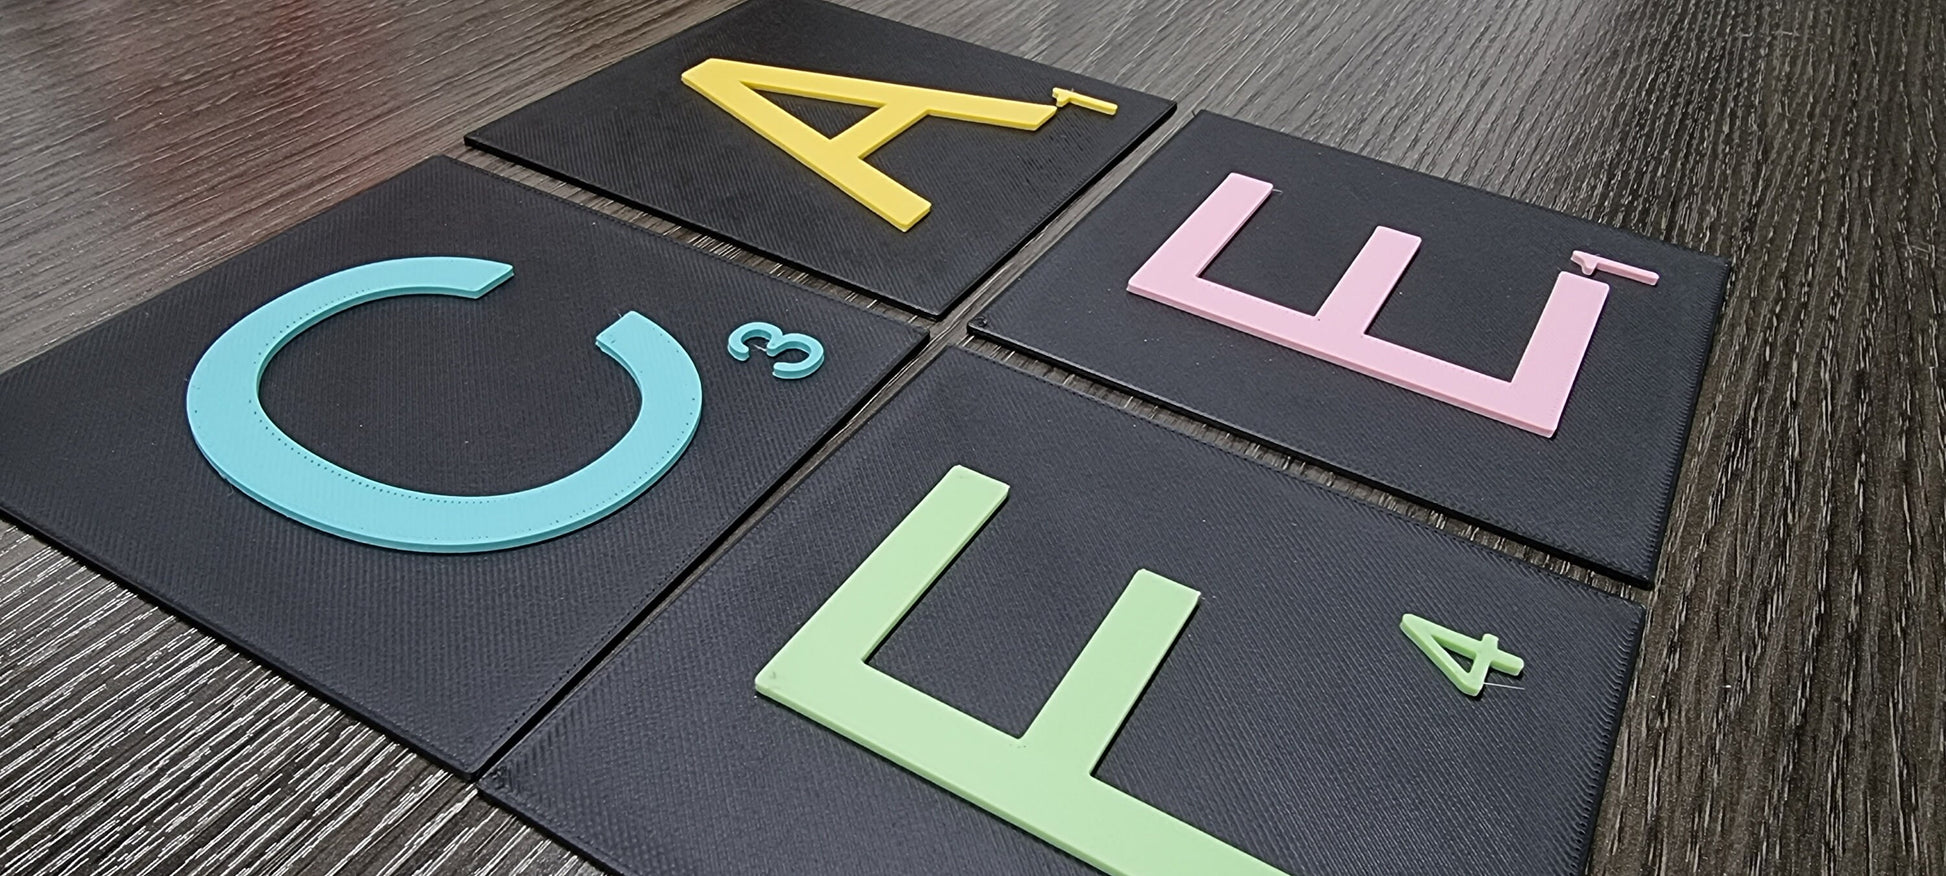 Custom Color Board Game Look Letter Tiles - 7 Inch. Modern Look Board Game Look Letter Tiles In Tons Of Colors!